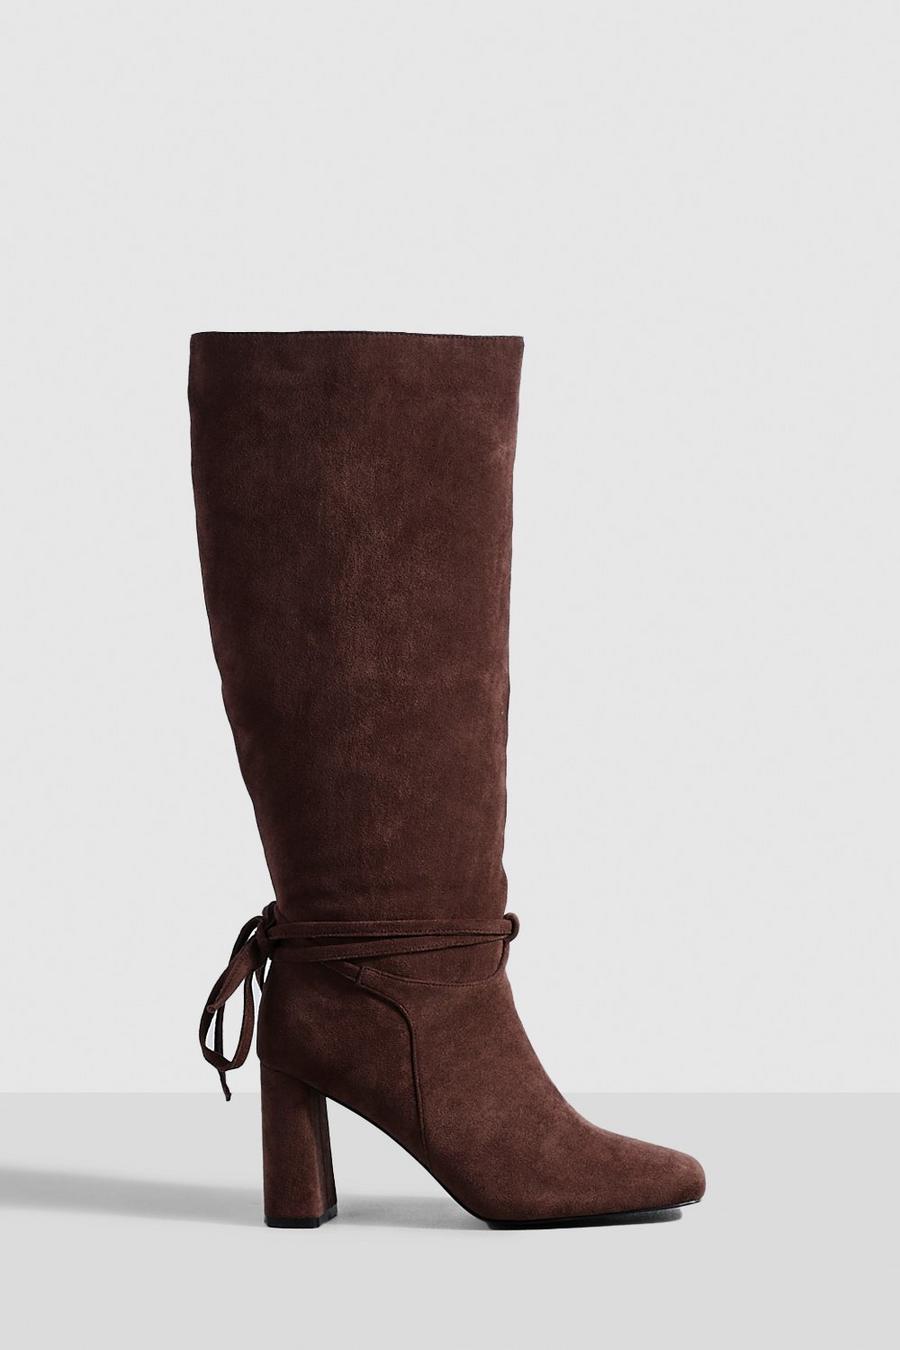 Chocolate marron Wide Fit Block Heel Bow Detail Knee High Boots